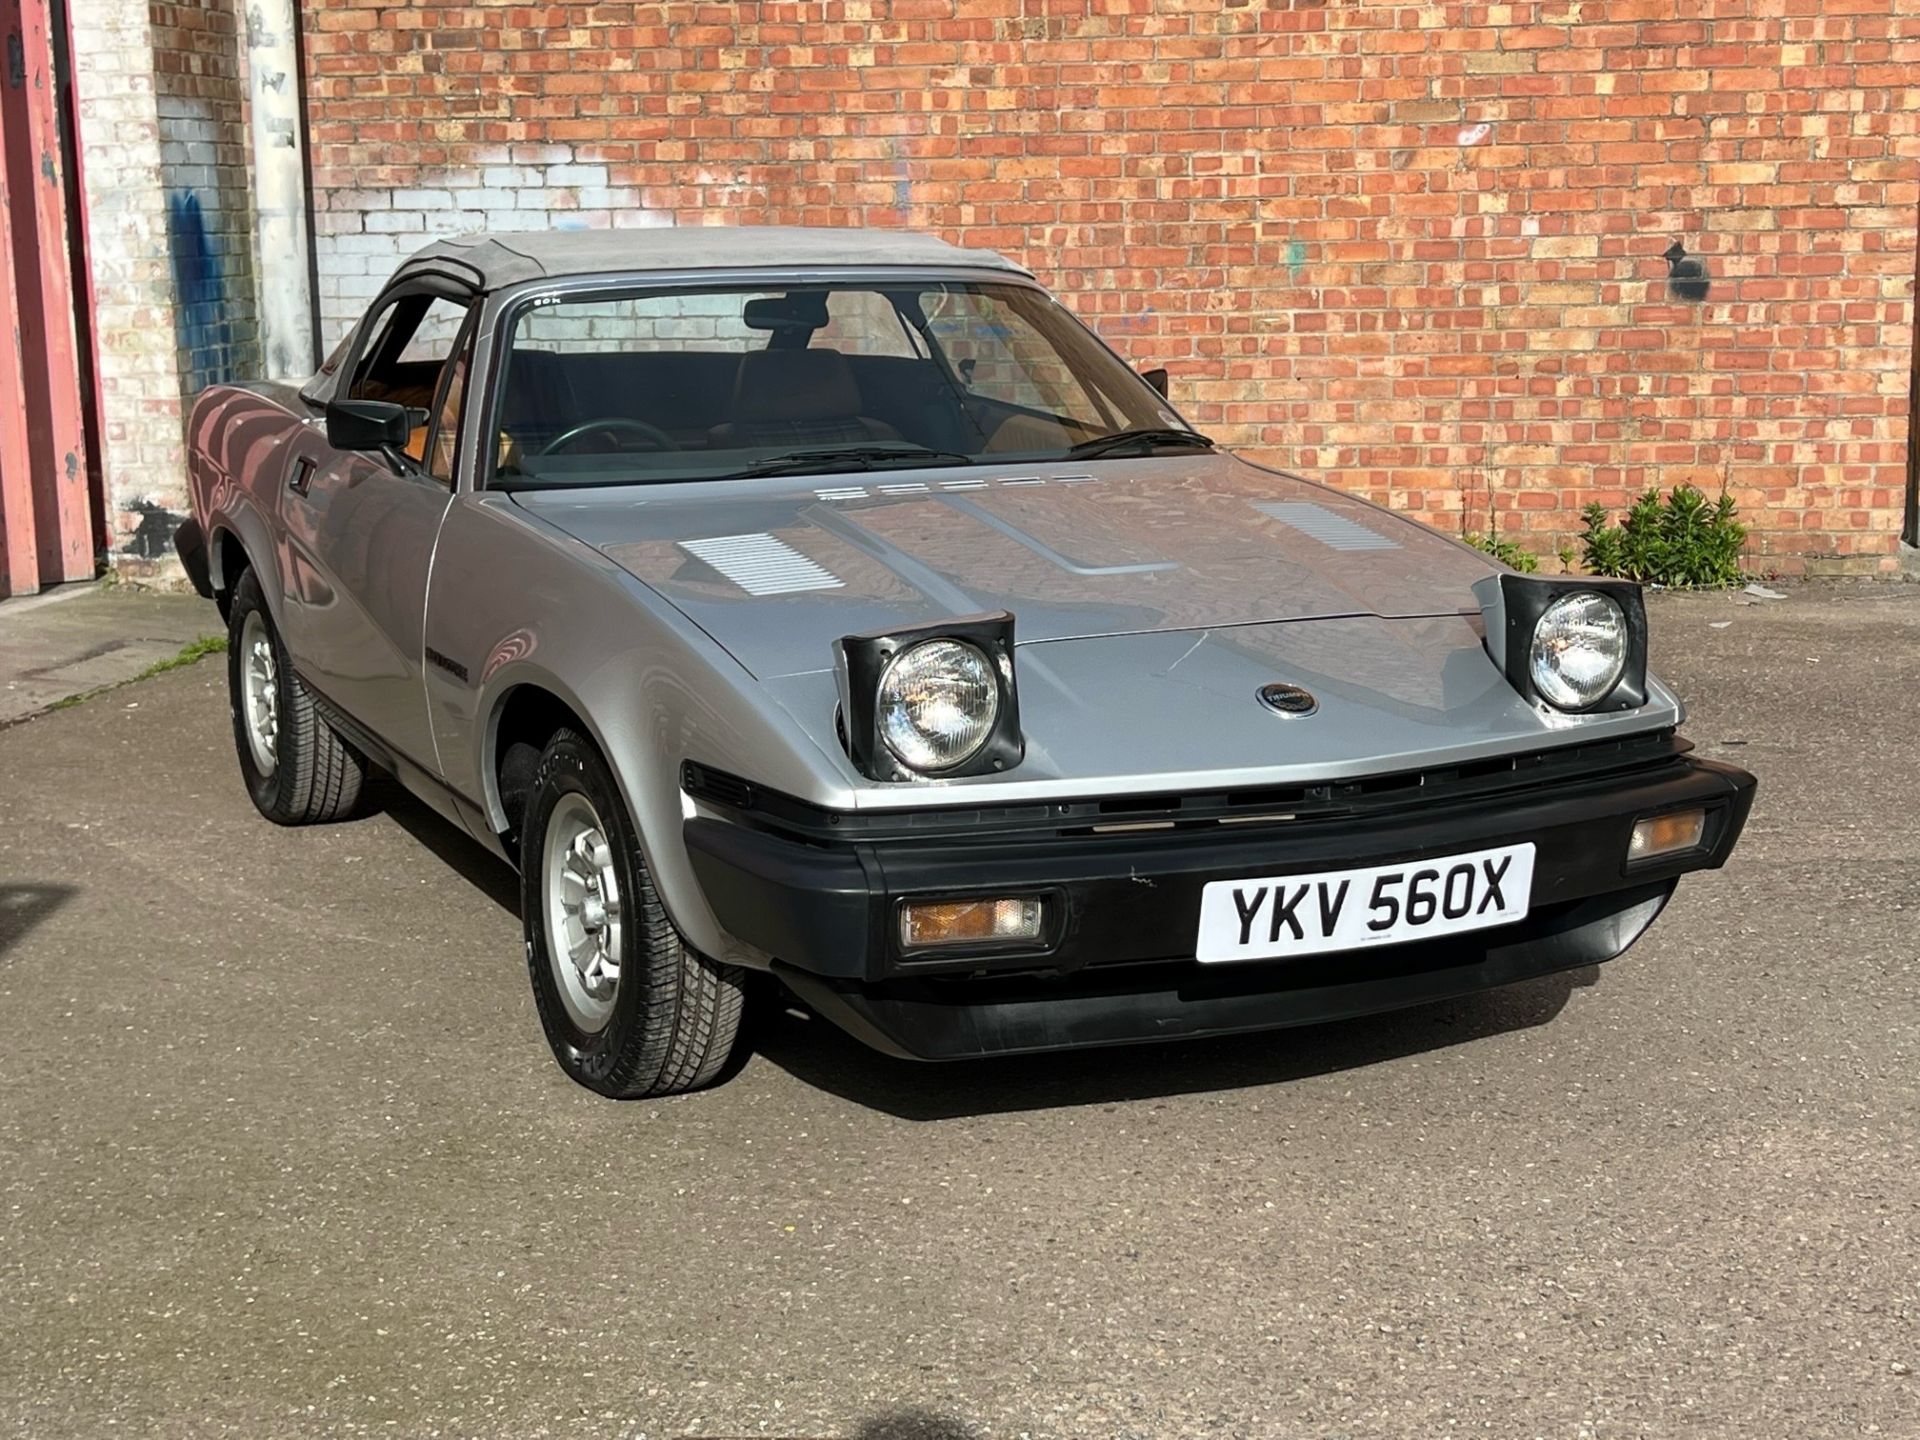 1982 Triumph TR7 Convertible Registration number YKV 560X Chassis number SATTPADJ7AA407800 - Image 10 of 16